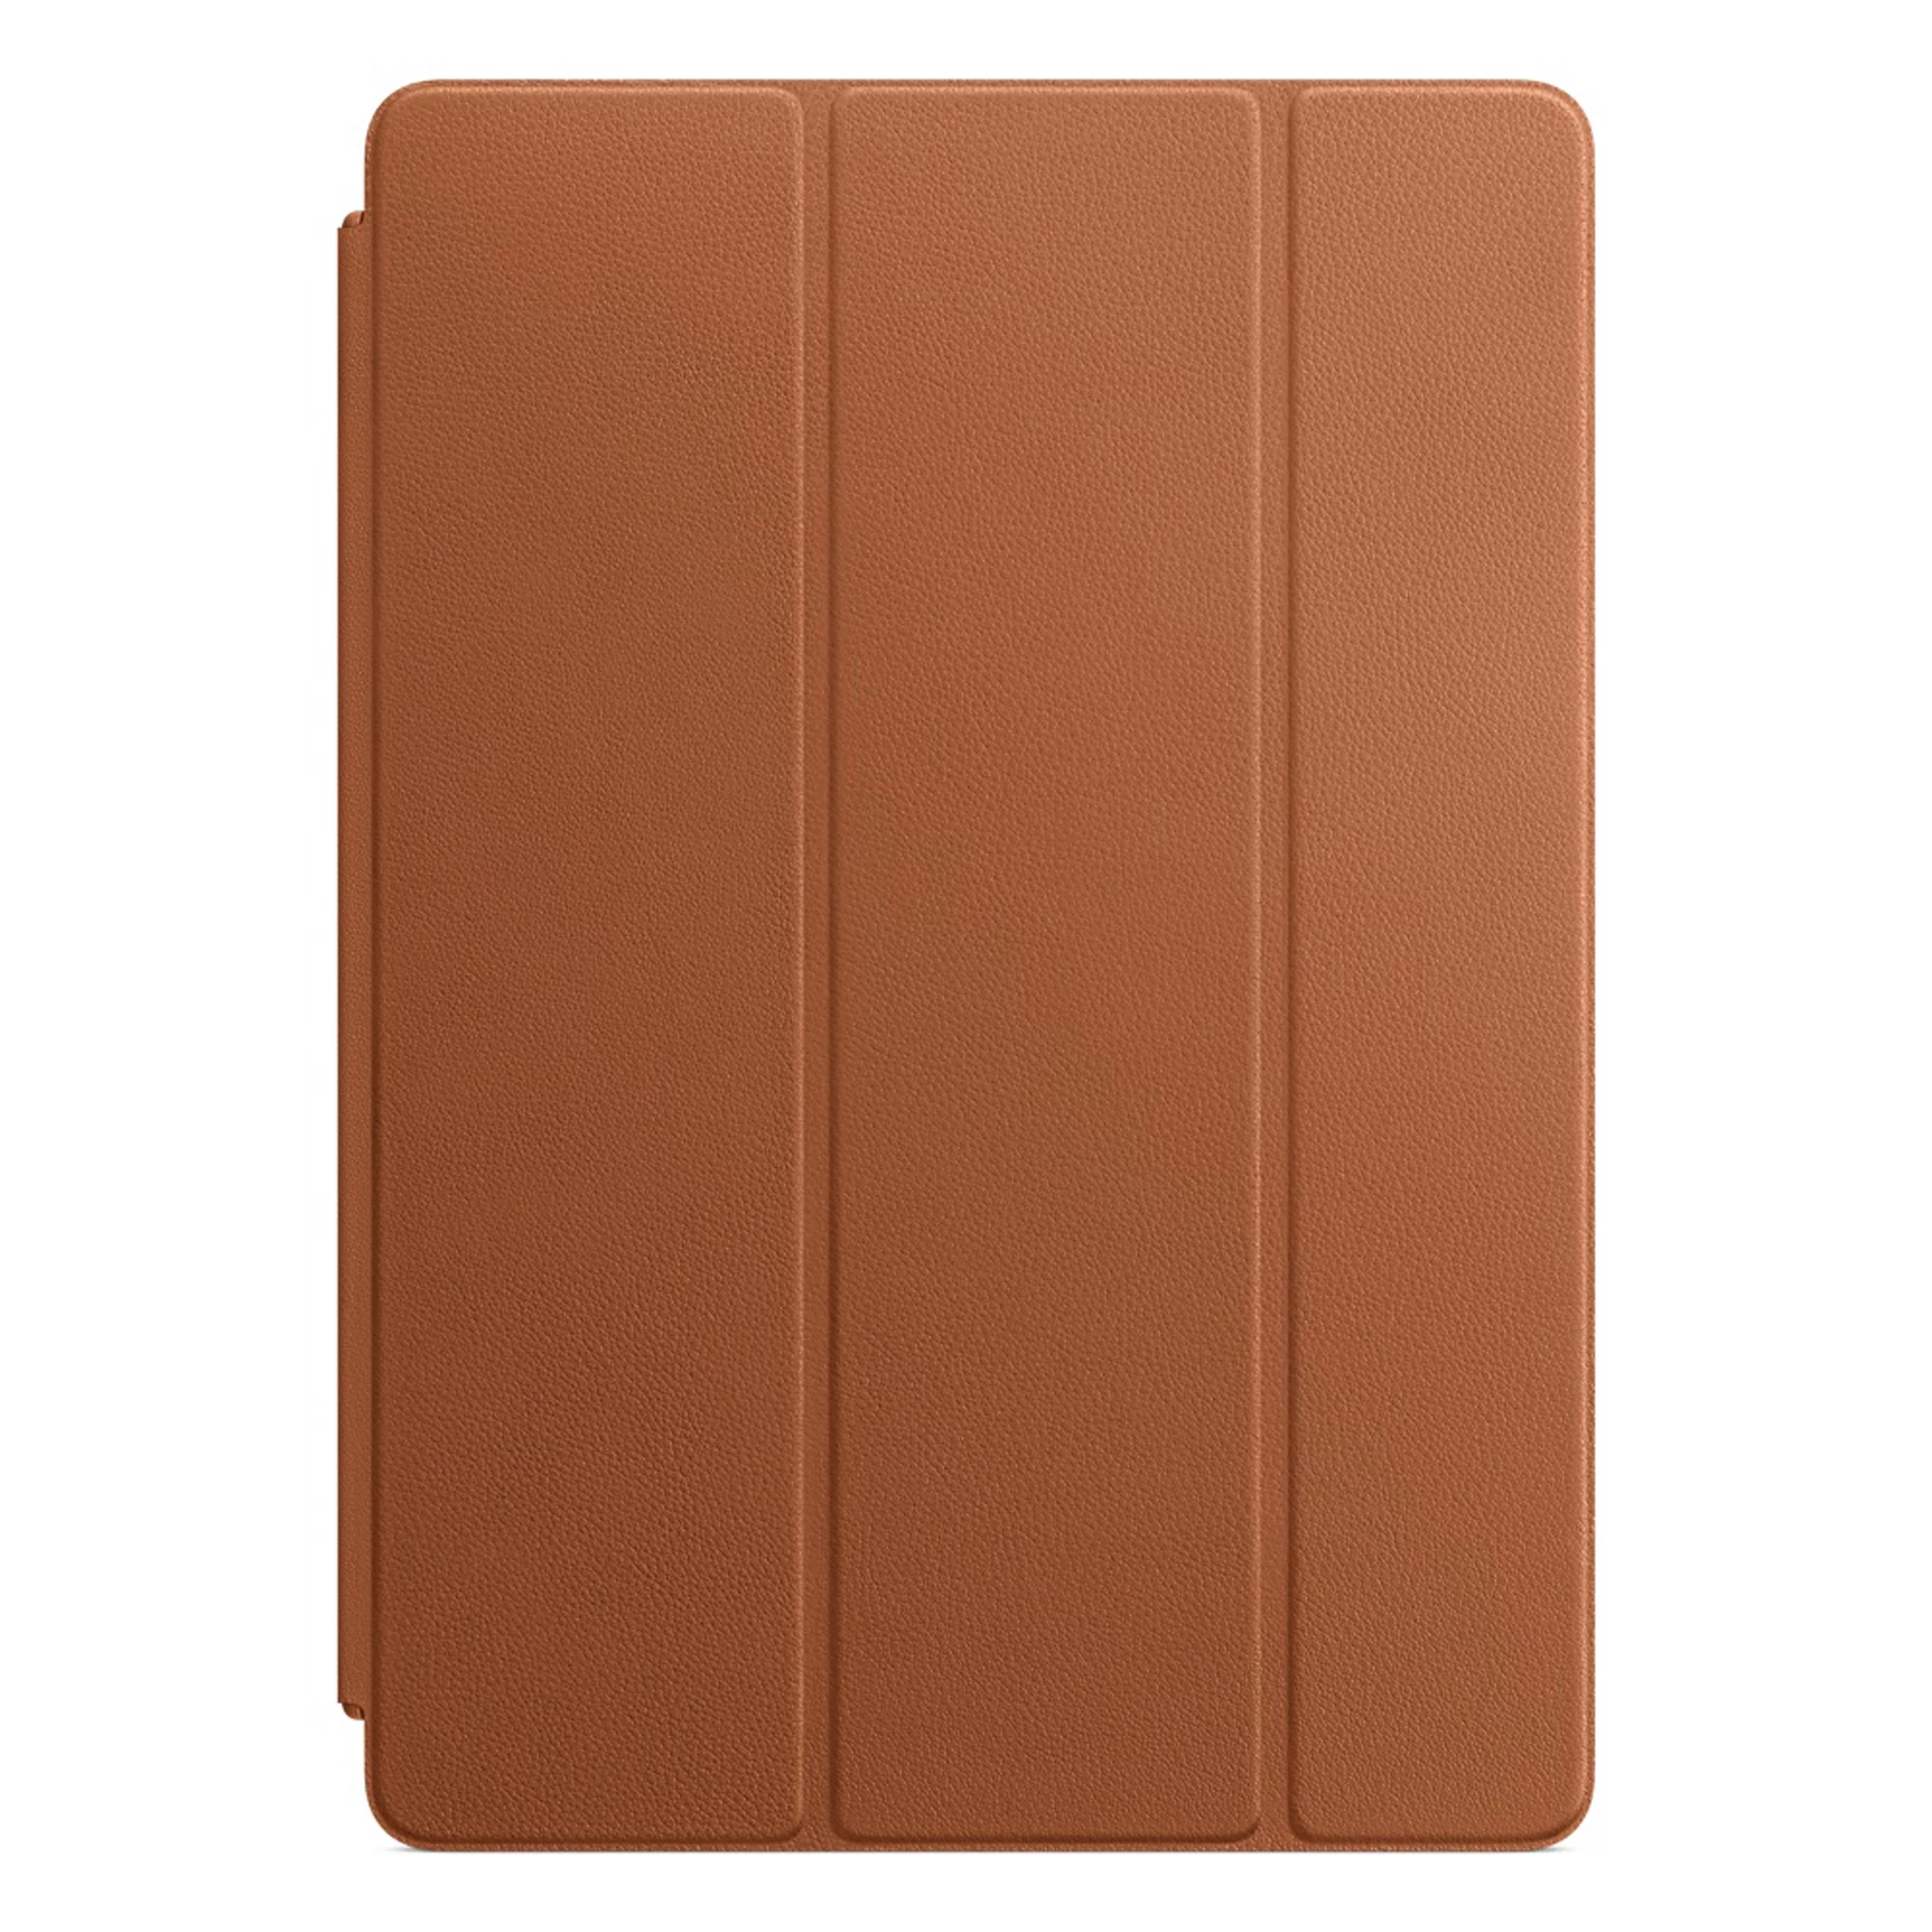 Apple Leather Smart Cover for iPad 10.2" / Air 3 / Pro 10.5" - Saddle Brown (MPU92)